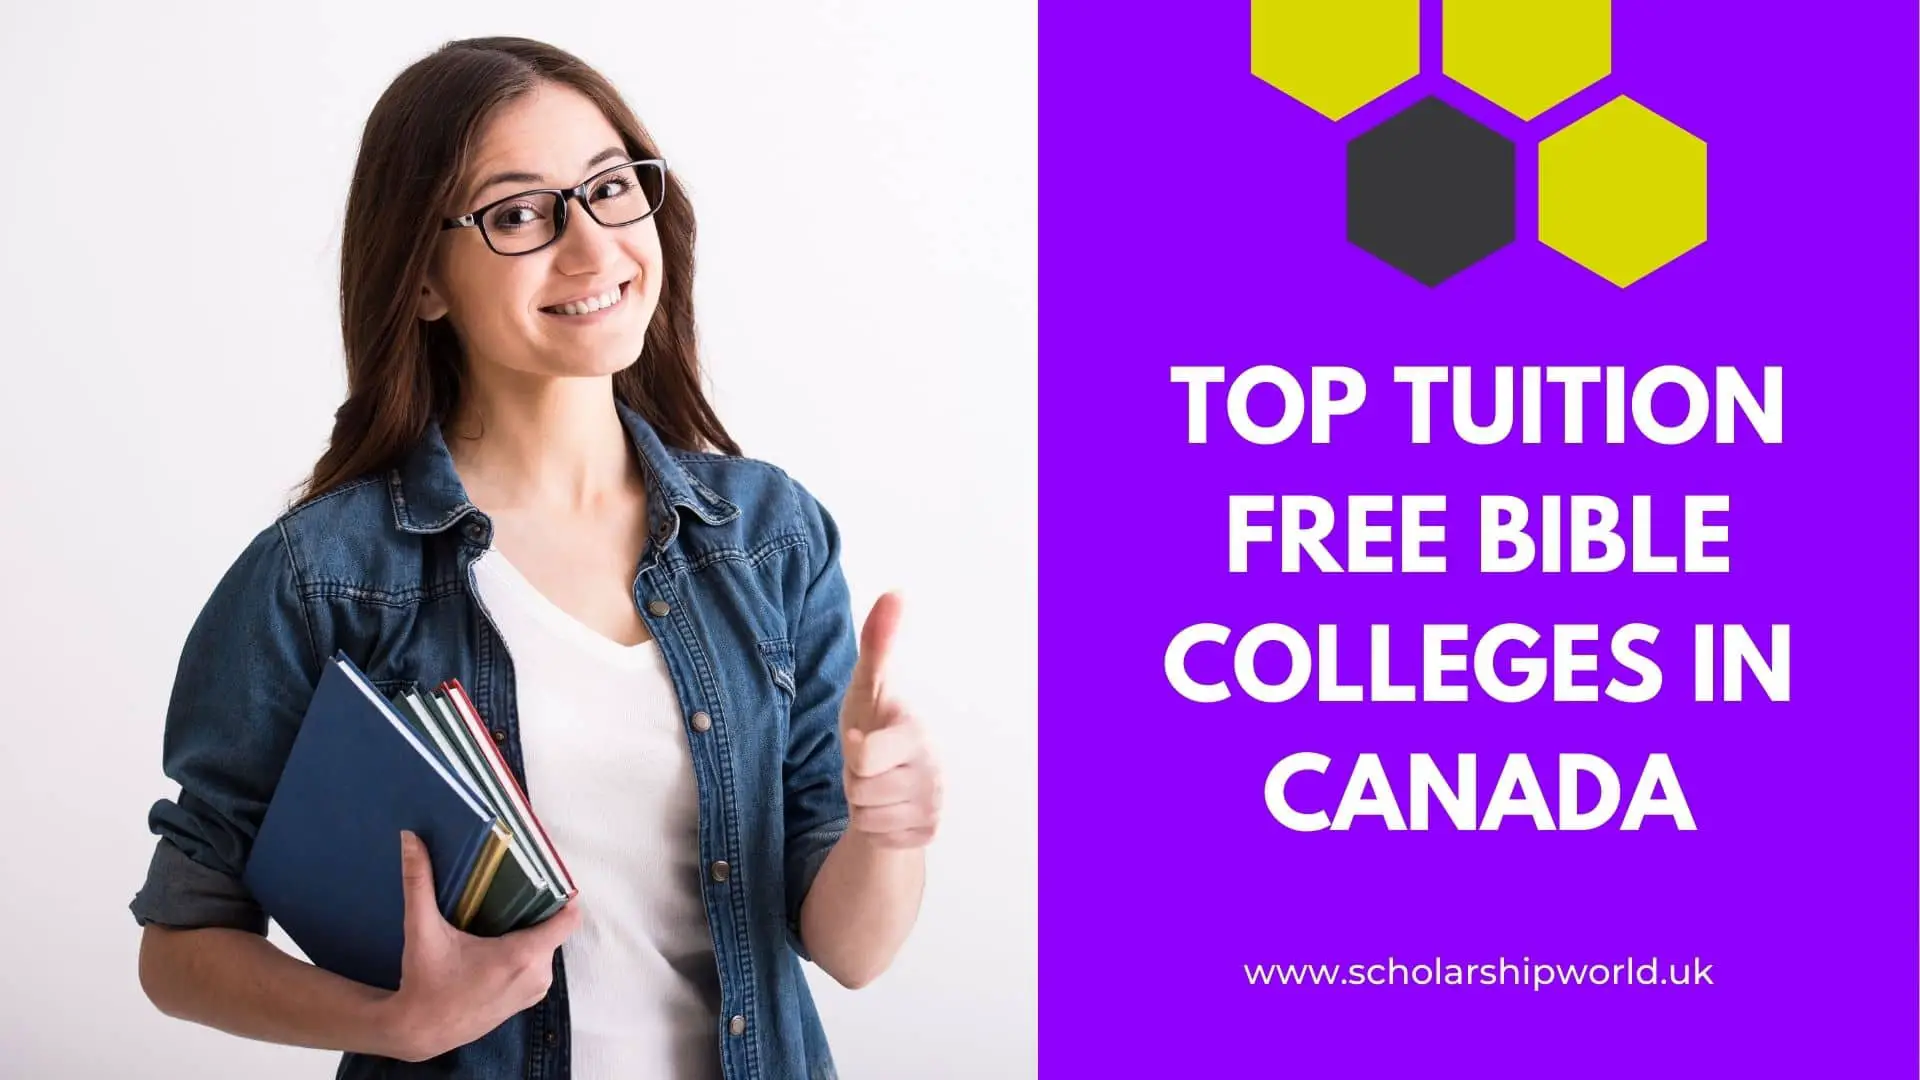 MUST READ: Top Tuition Free Bible Colleges In Canada In 2022